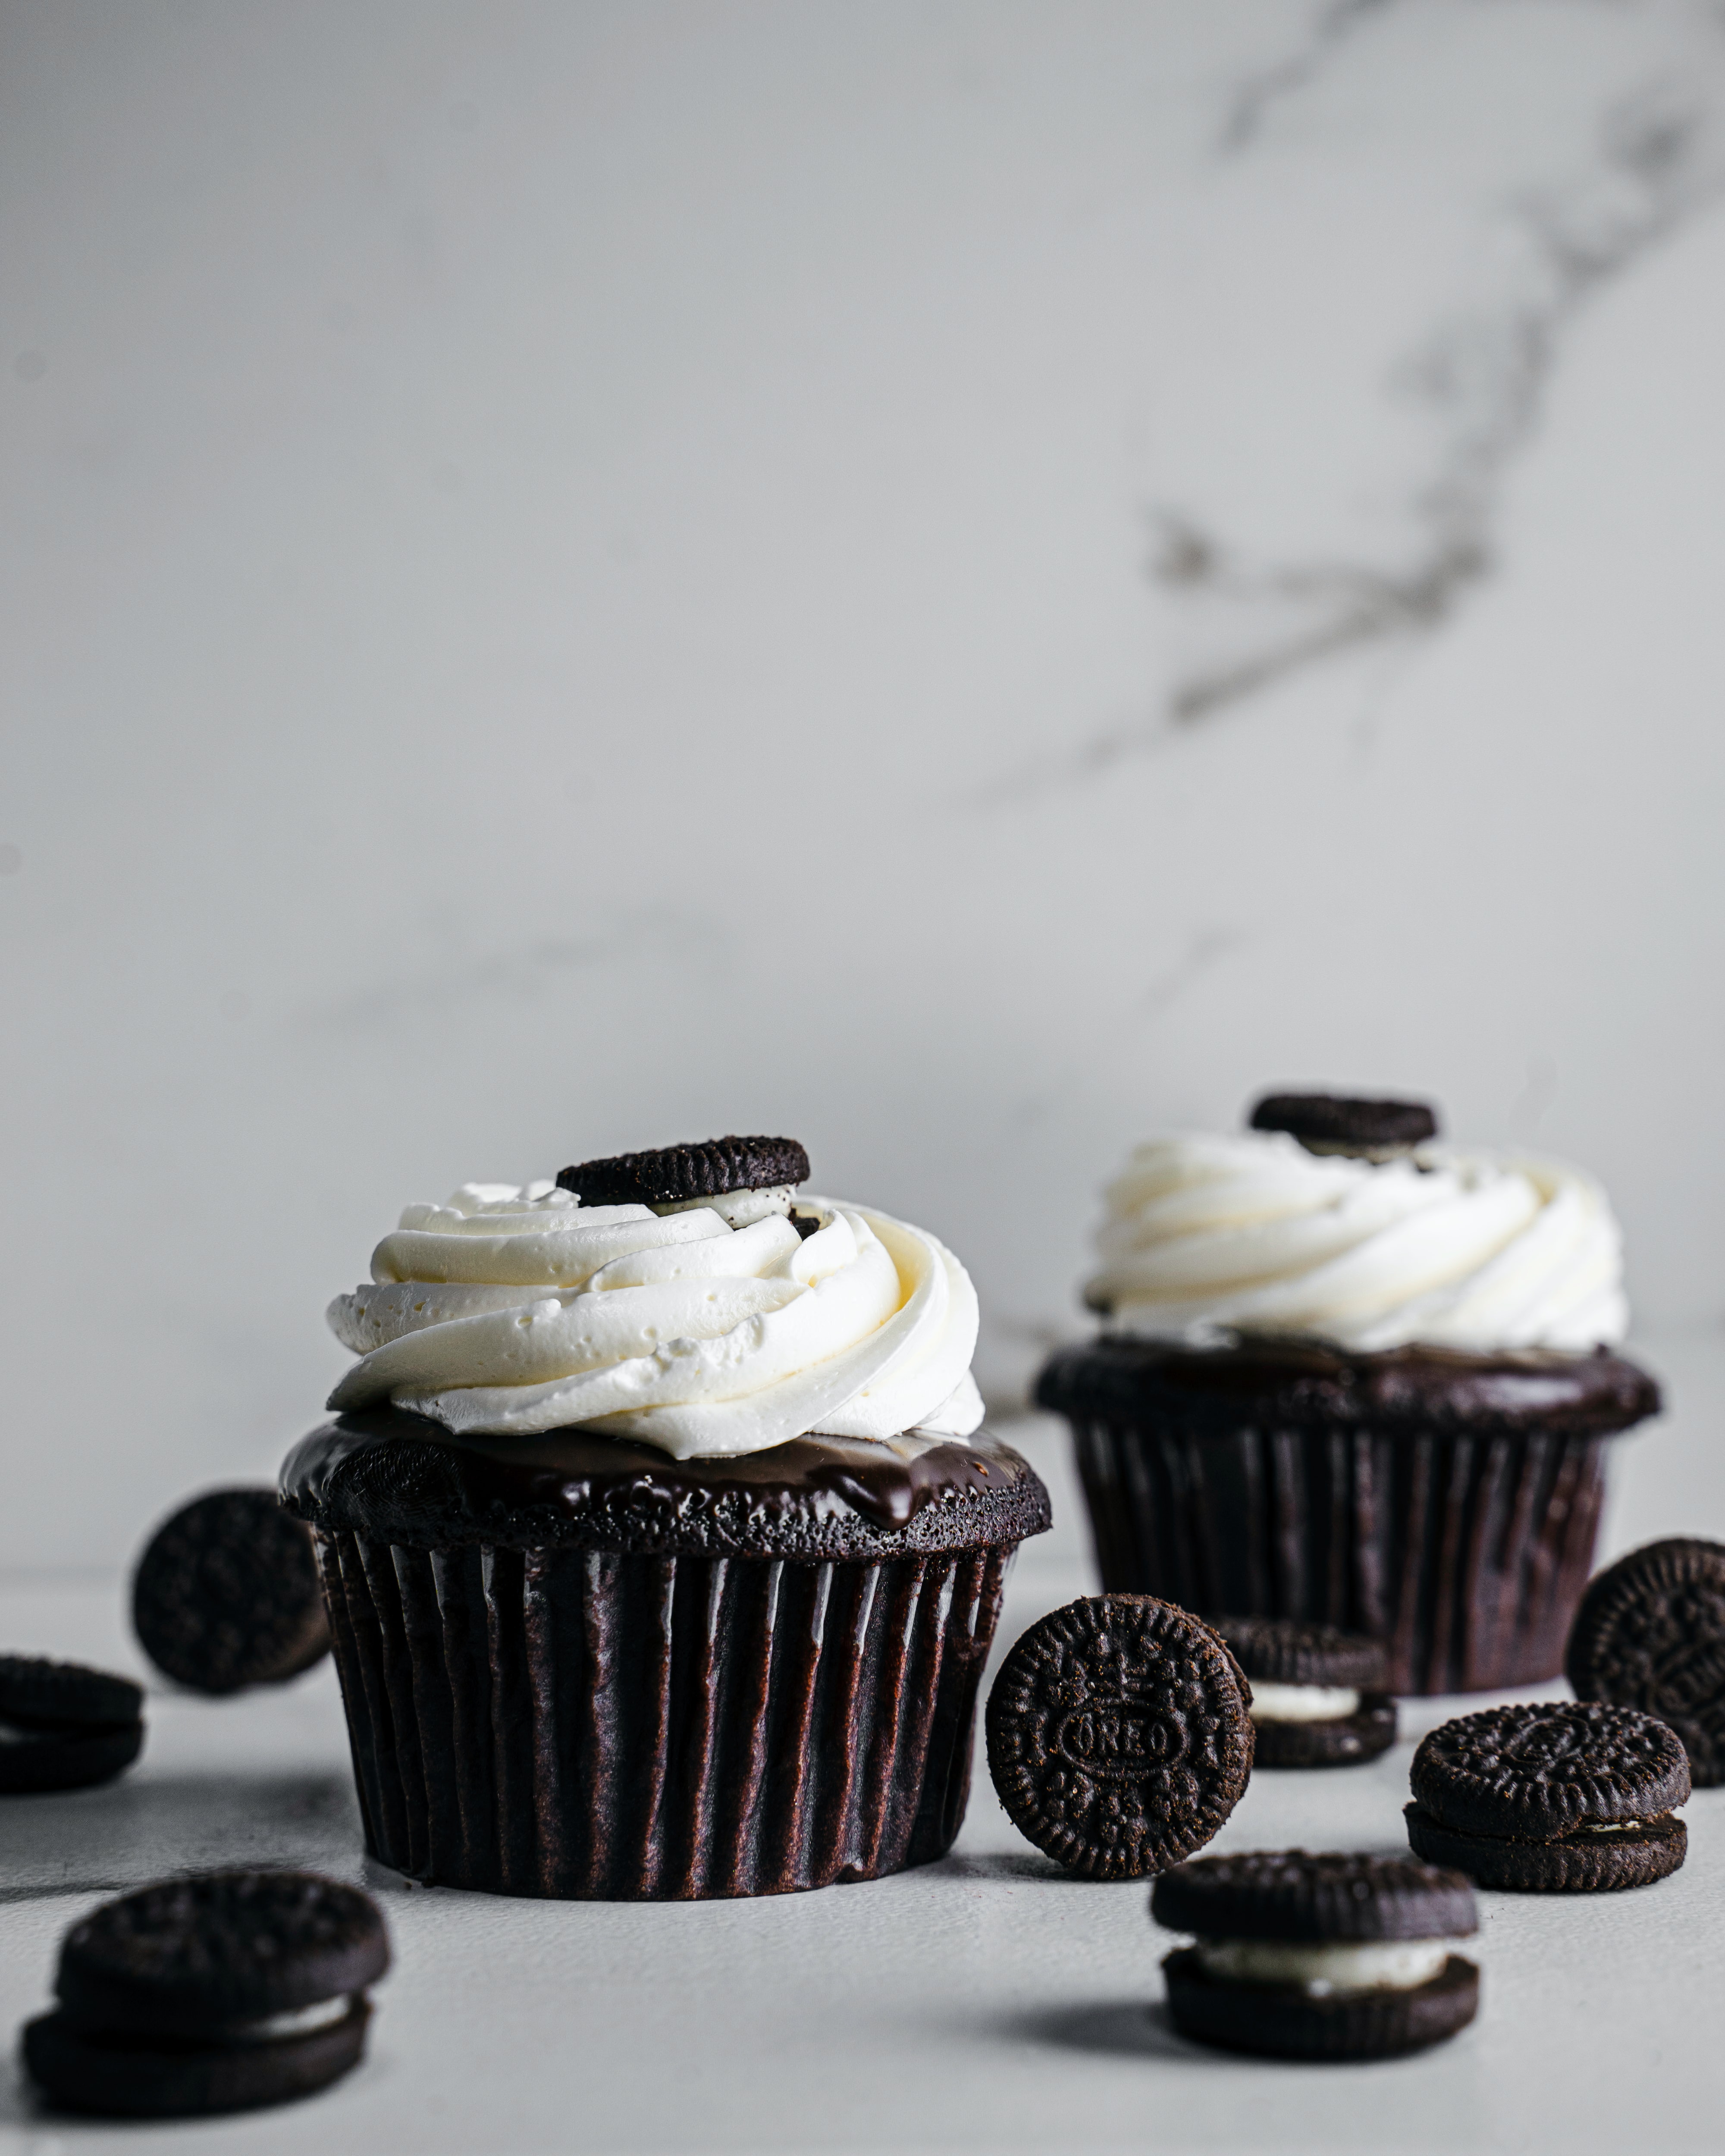 Cupcakes HD Smartphone Background